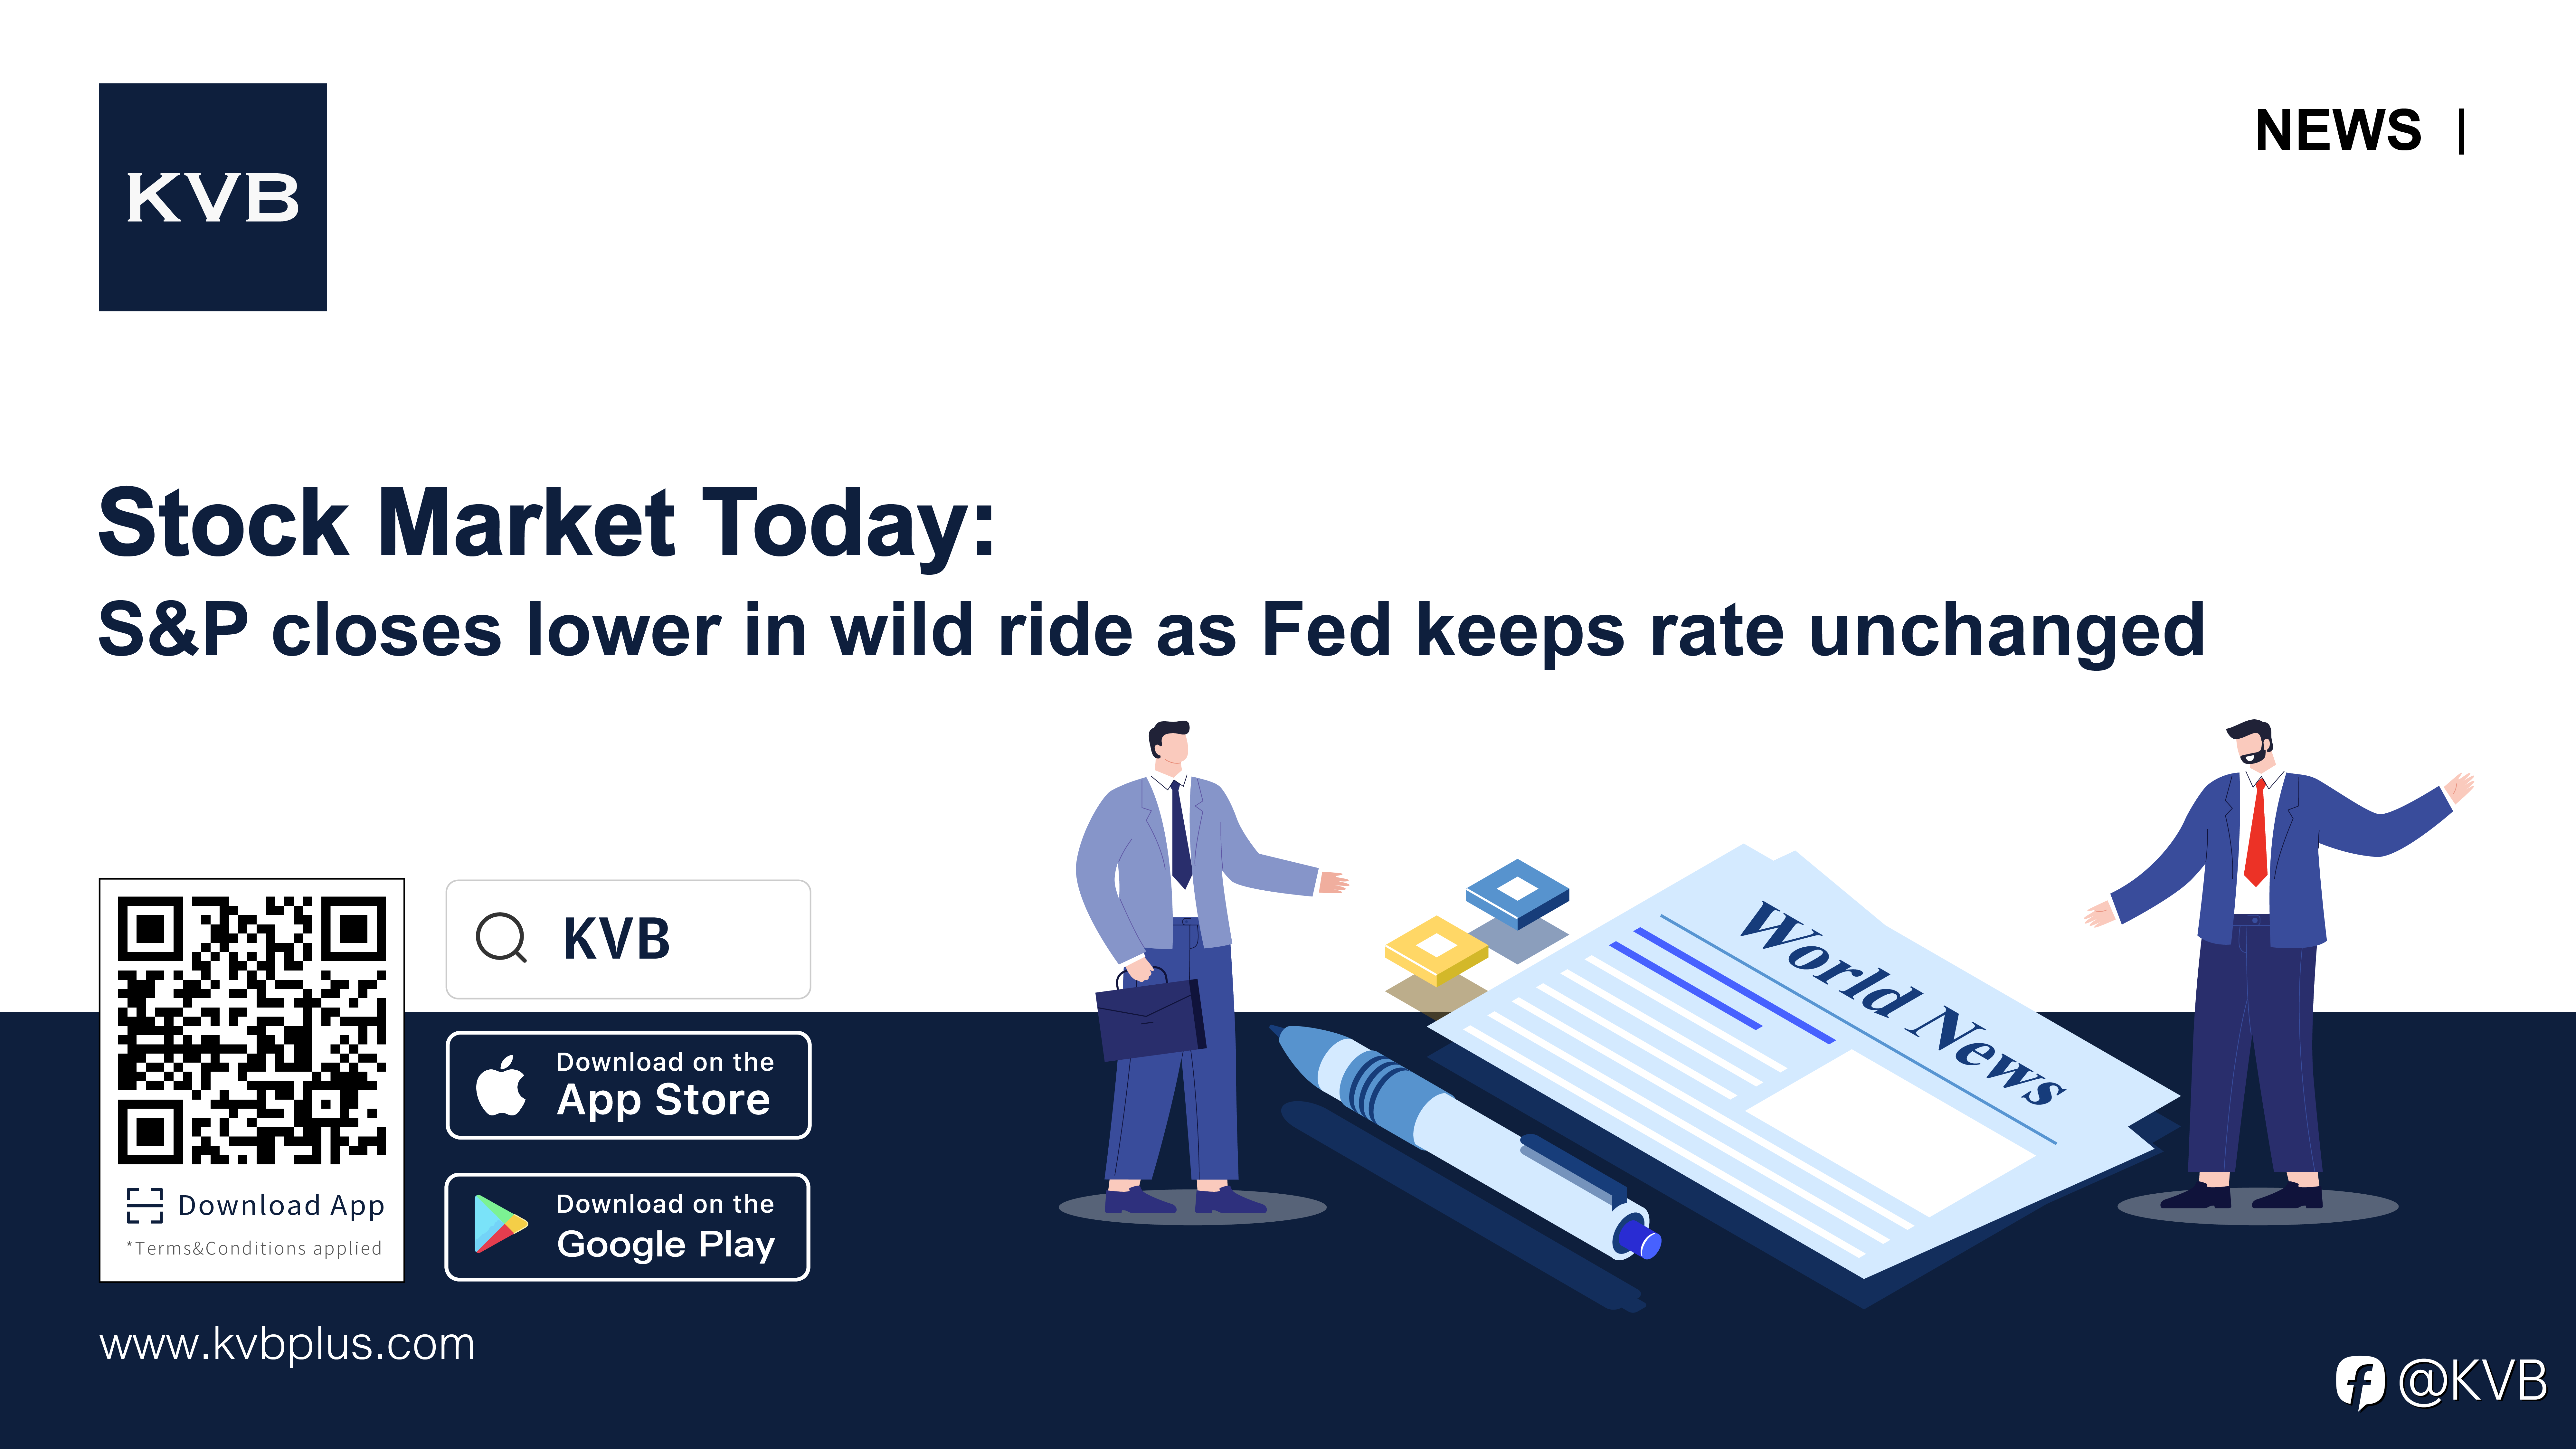 🚨 Stock Market Today: S&P closes lower in wild ride as Fed keeps rate unchanged 😲